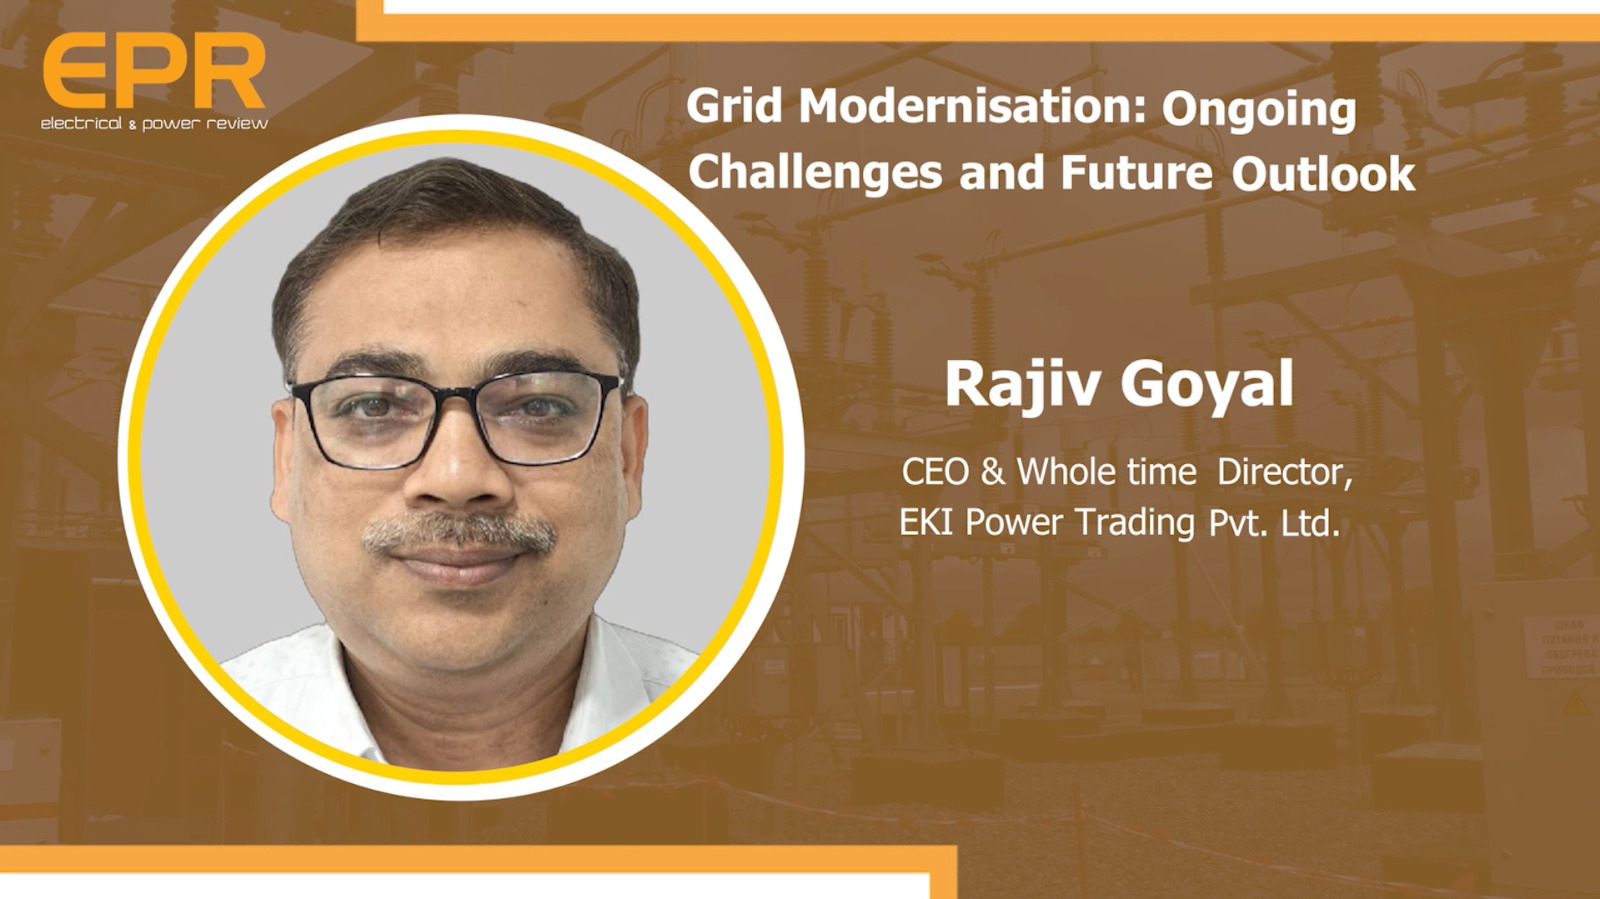 Grid Modernisation: Ongoing Challenges and Future Outlook | Rajiv Goyal | EPR Magazine